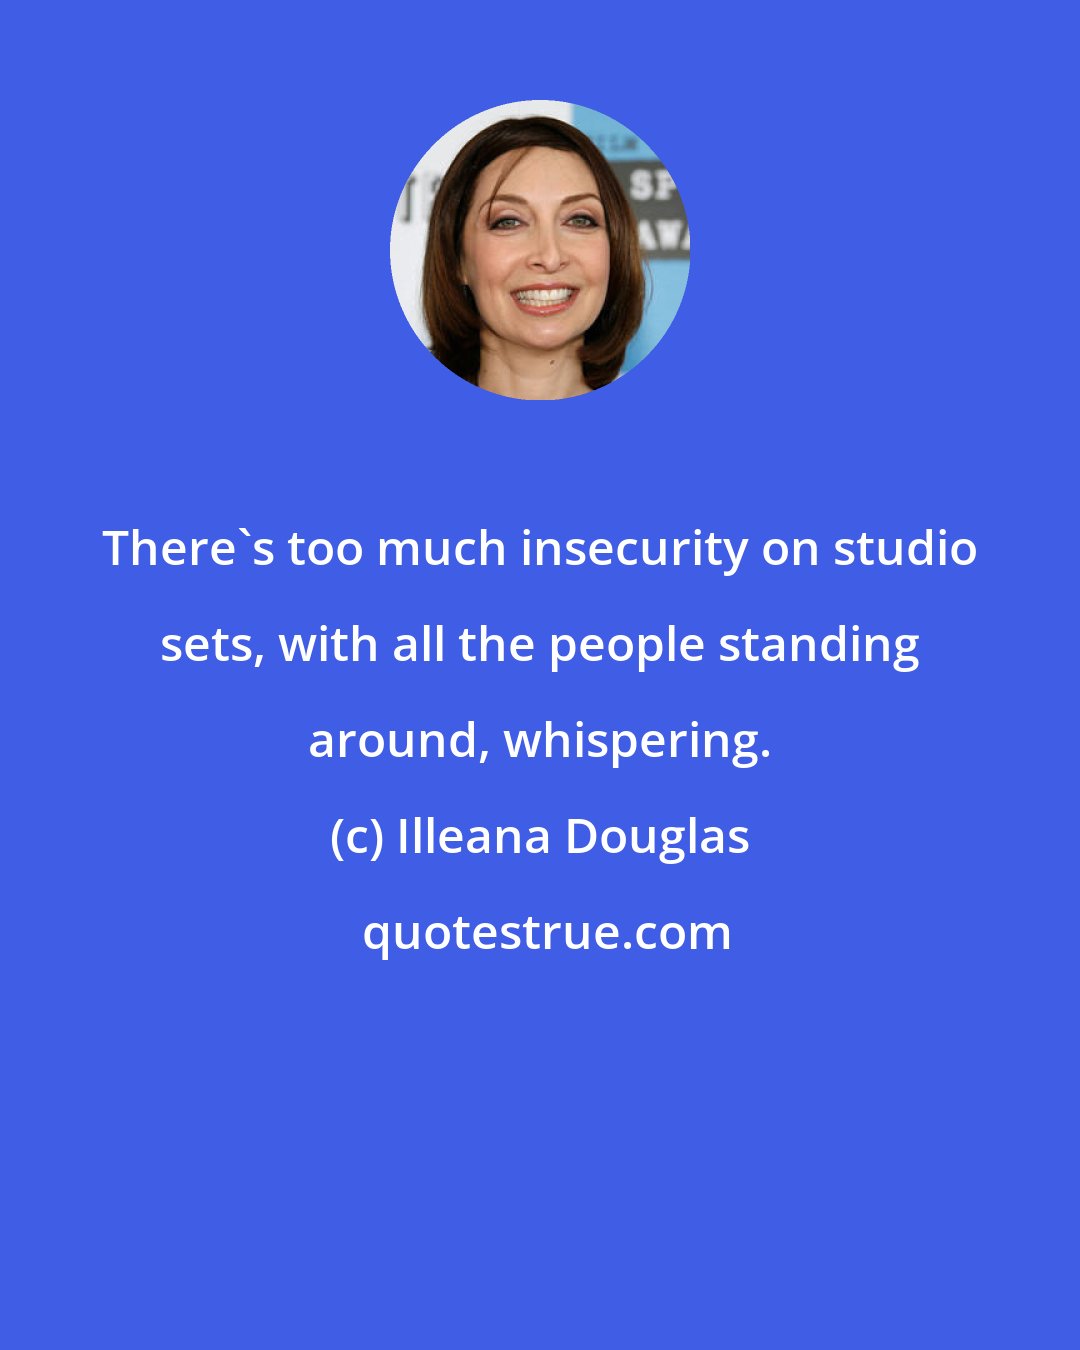 Illeana Douglas: There's too much insecurity on studio sets, with all the people standing around, whispering.